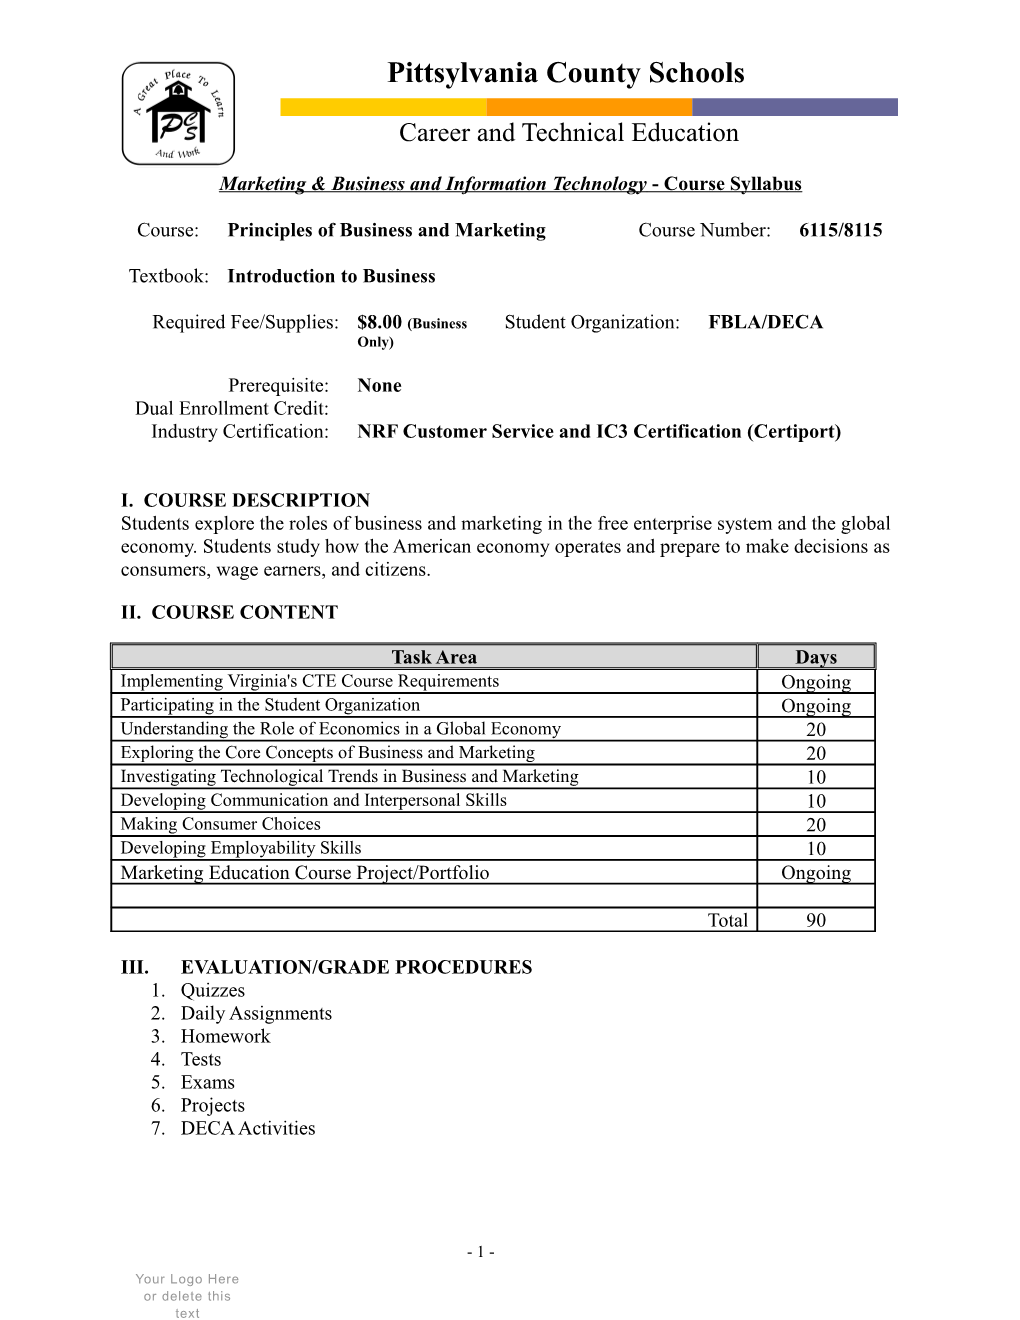 Agricultural Education Course Syllabus s5